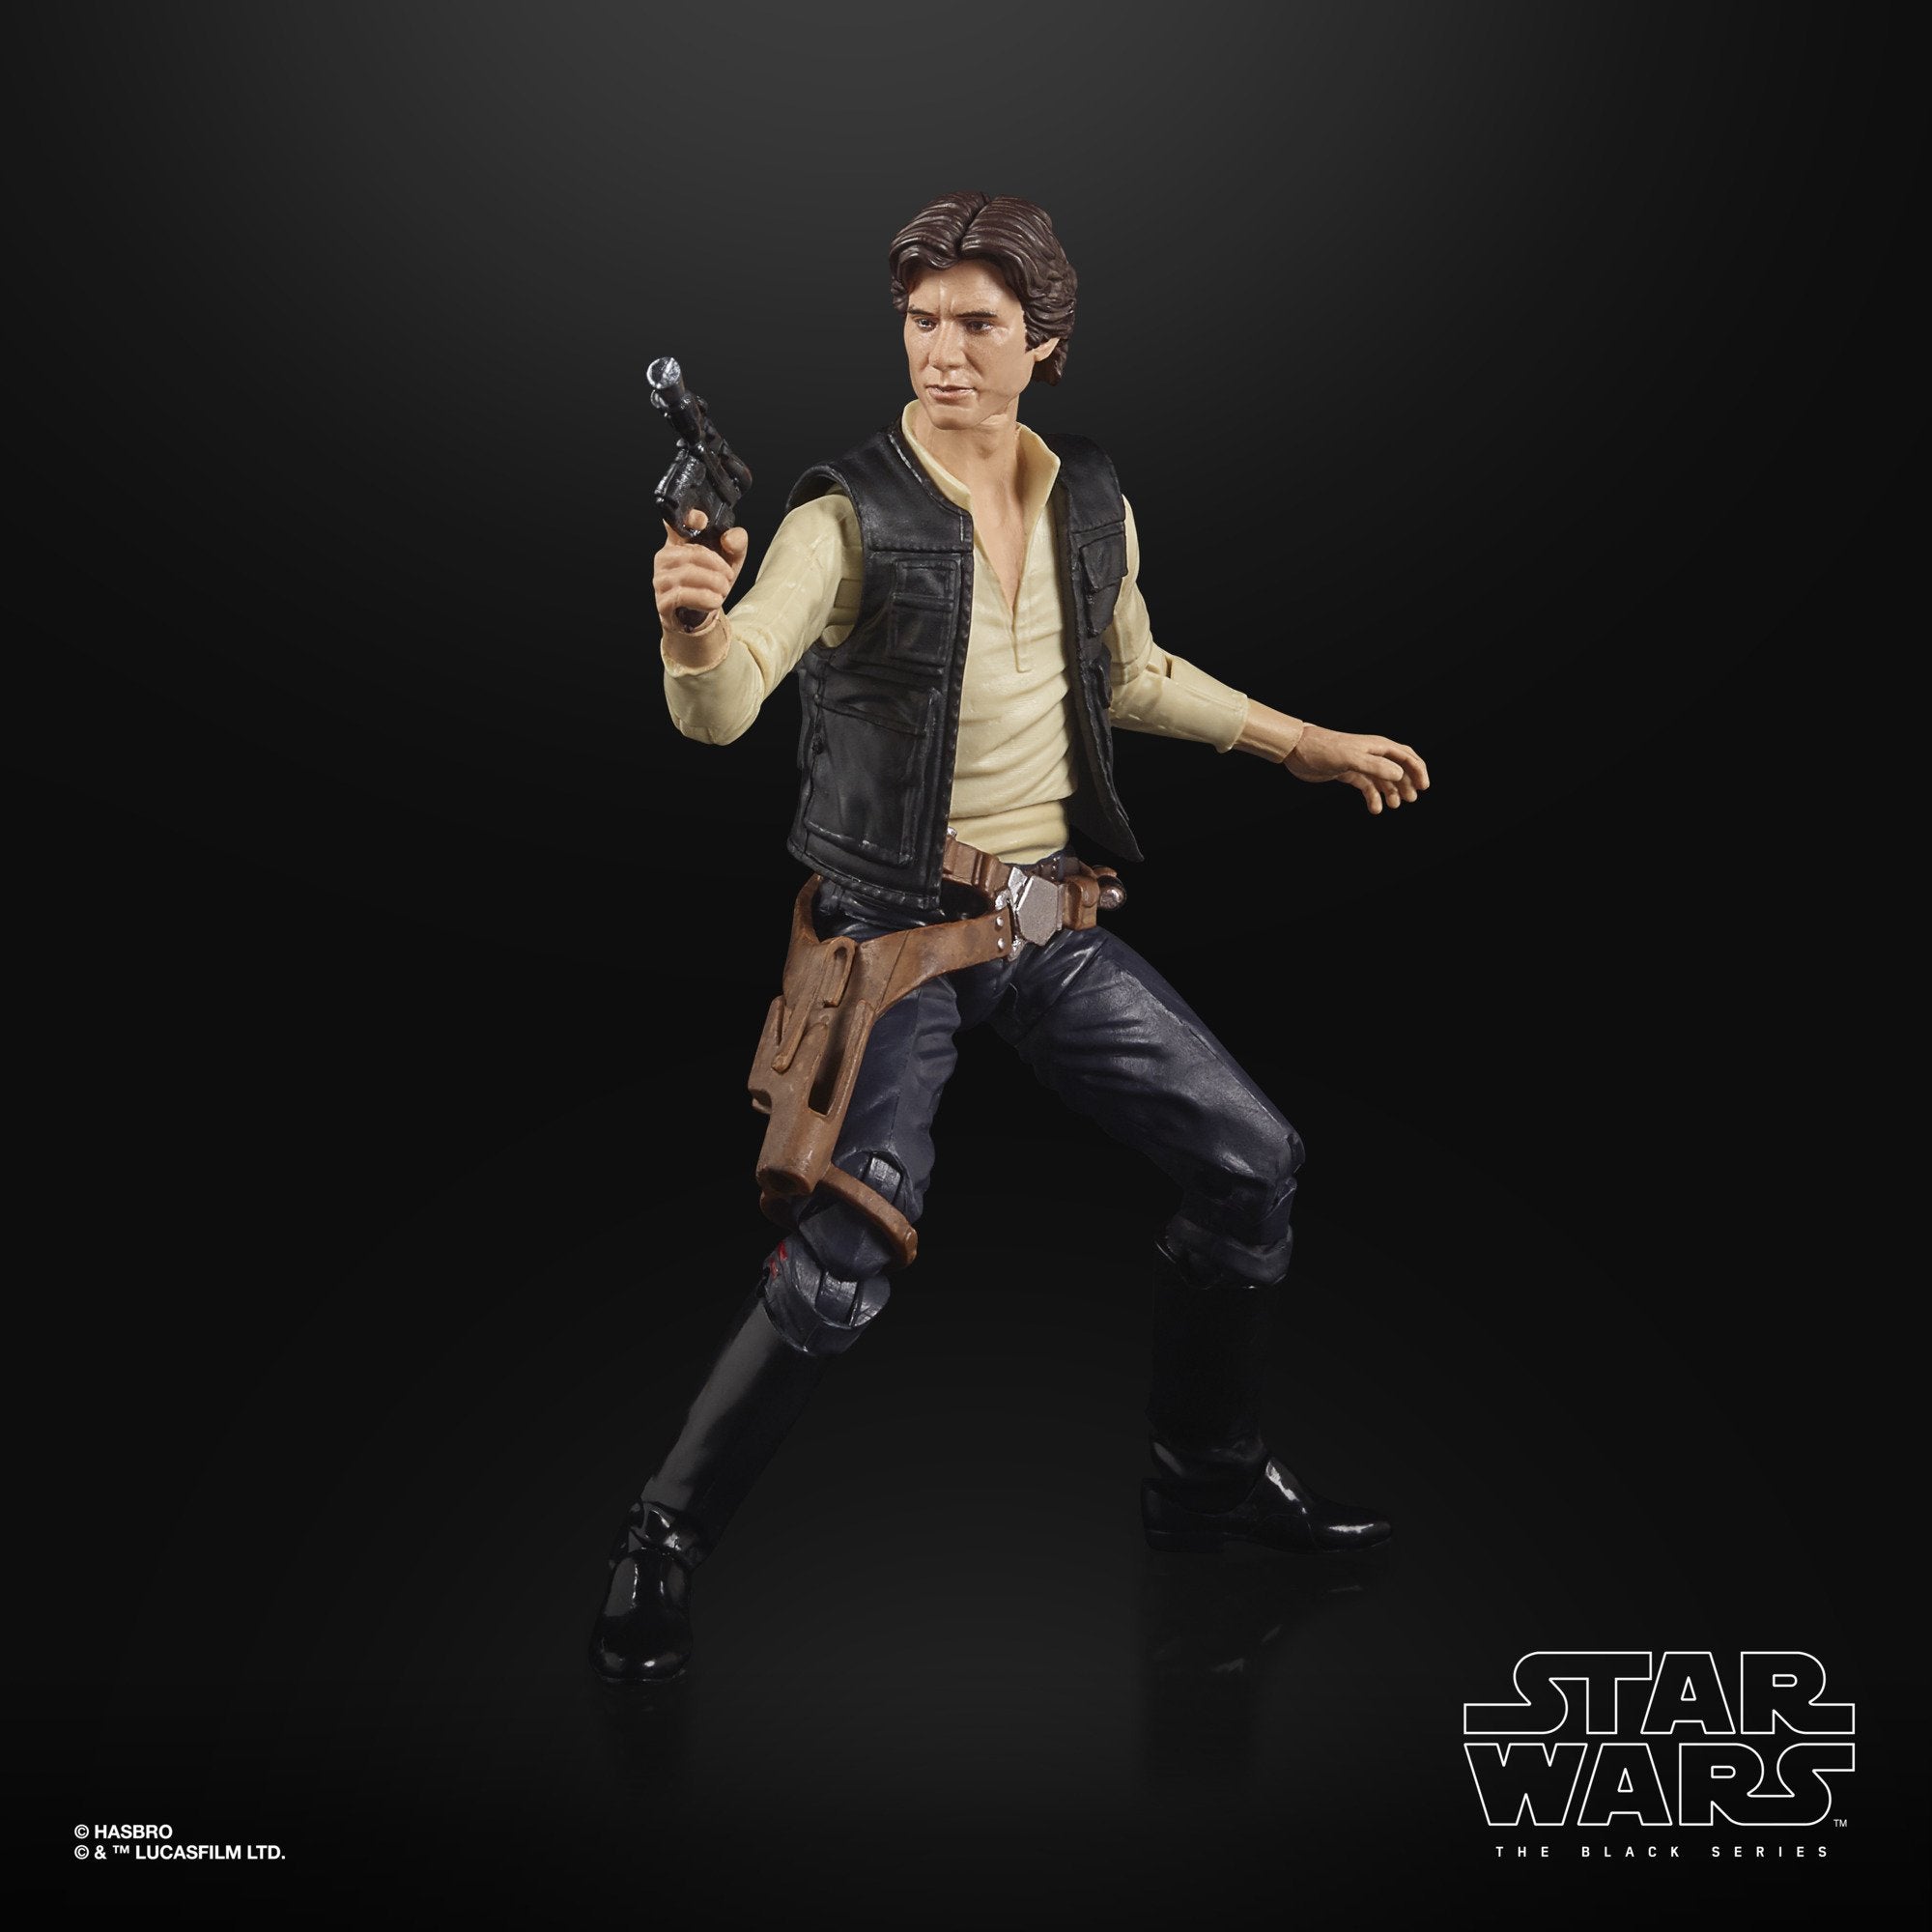 Hasbro Star Wars The Black Series Lucasfilm 50th Anniversary The Power of the Force Han Solo 6 Inch Action Figure